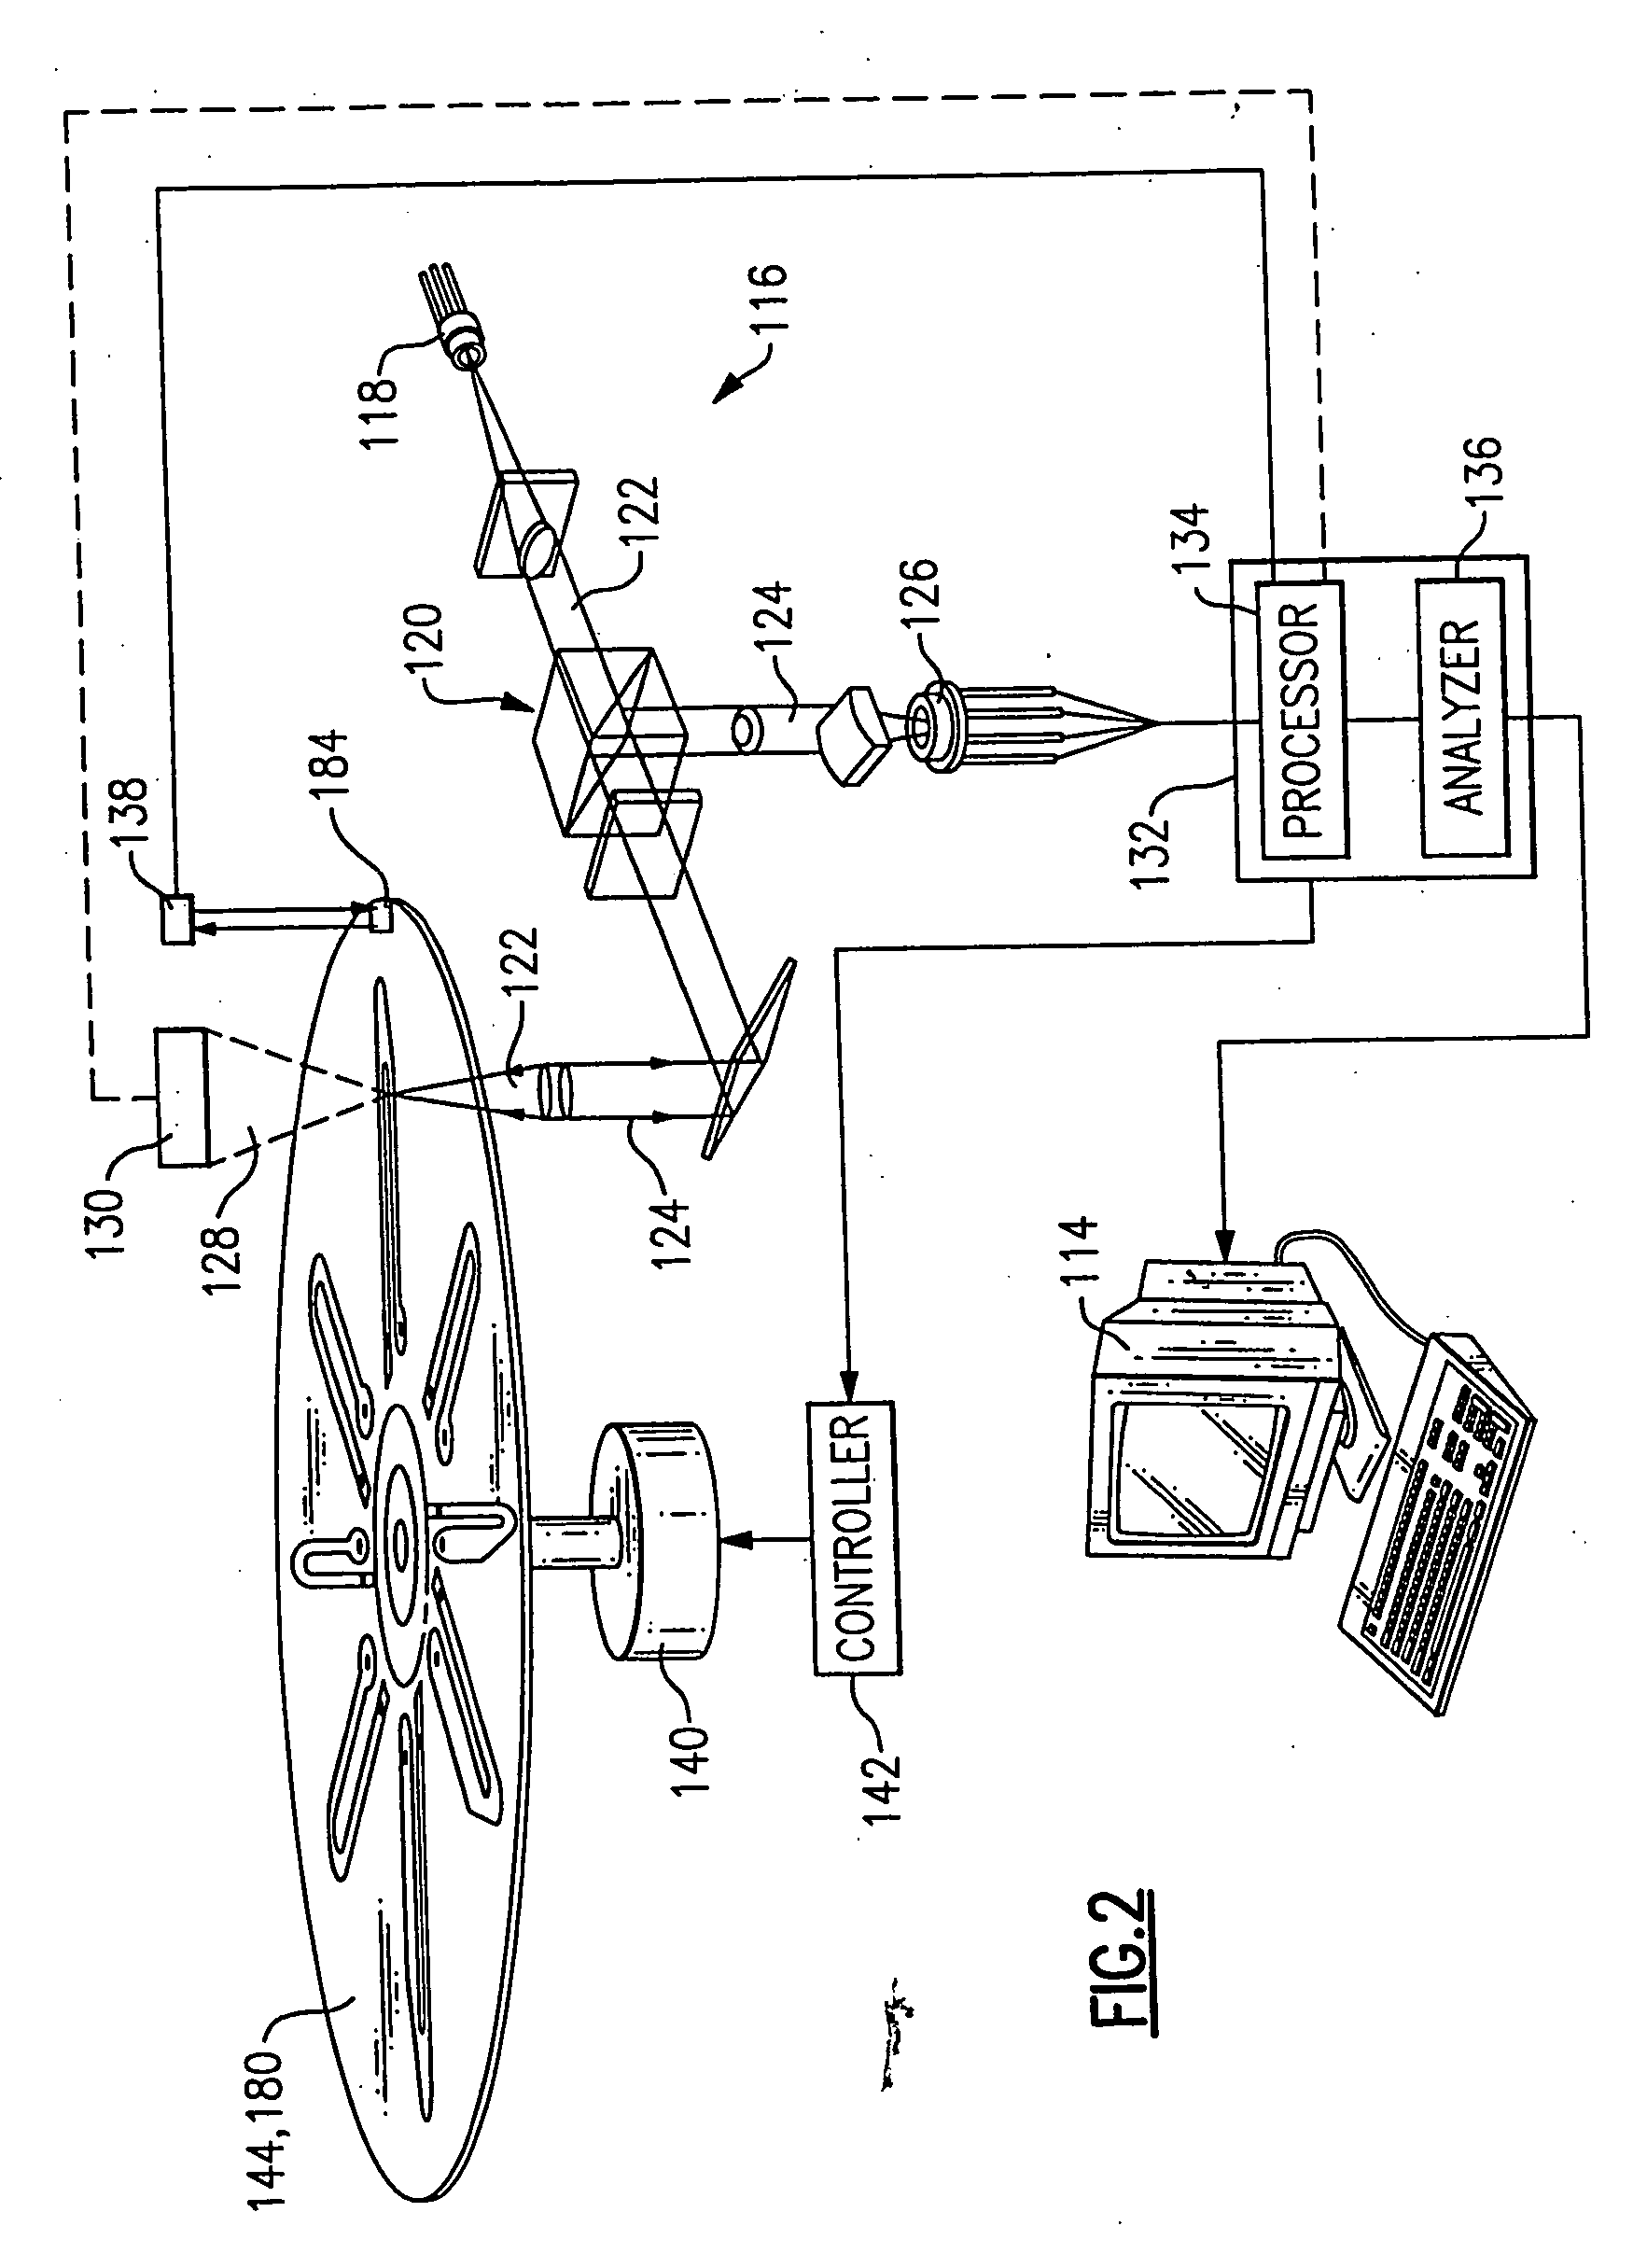 Use of restriction enzymes and other chemical methods to decrease non-specific binding in dual bead assays and related bio-discs, methods, and system apparatus for detecting medical targets